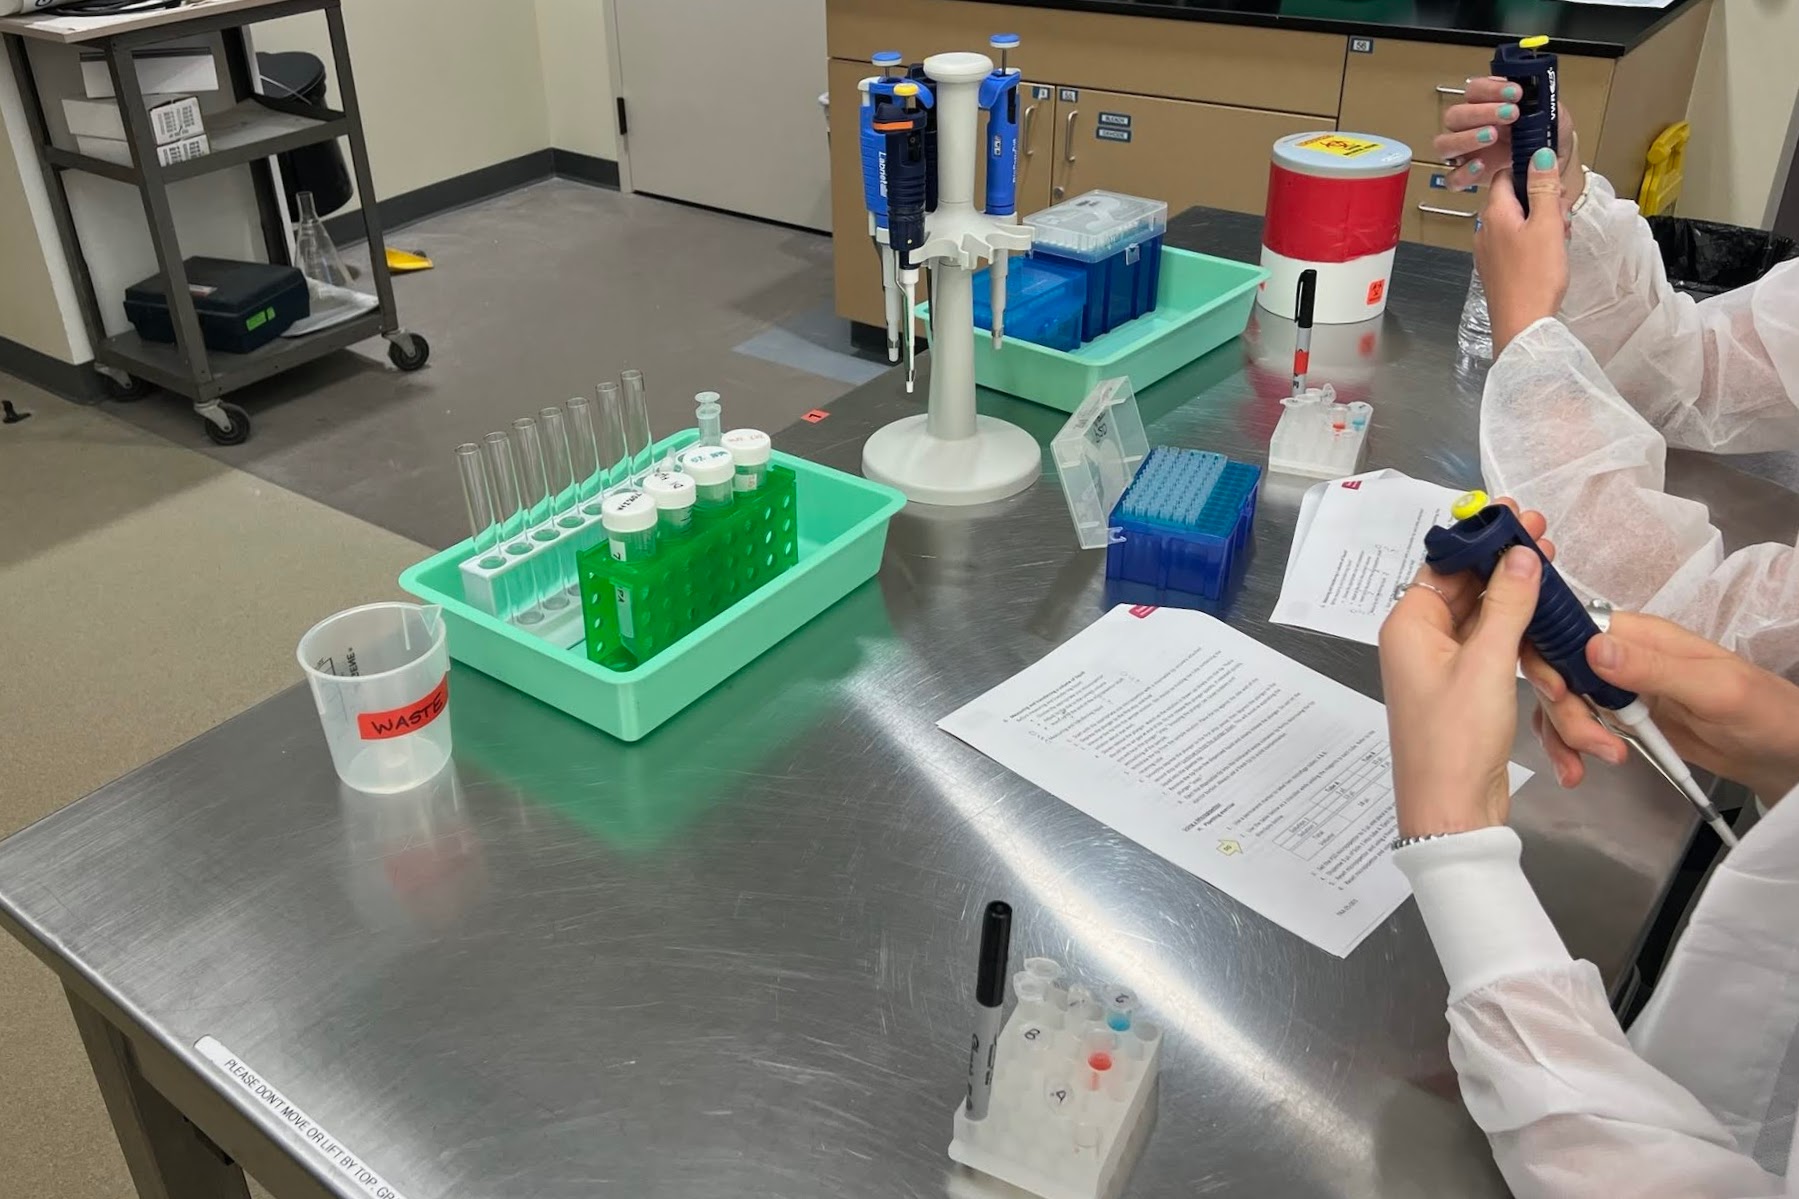 High school students learn how to use micropipettes in a workshop by Dr. Hovik Gasparyan. Photo credit: Bronwyn Smith